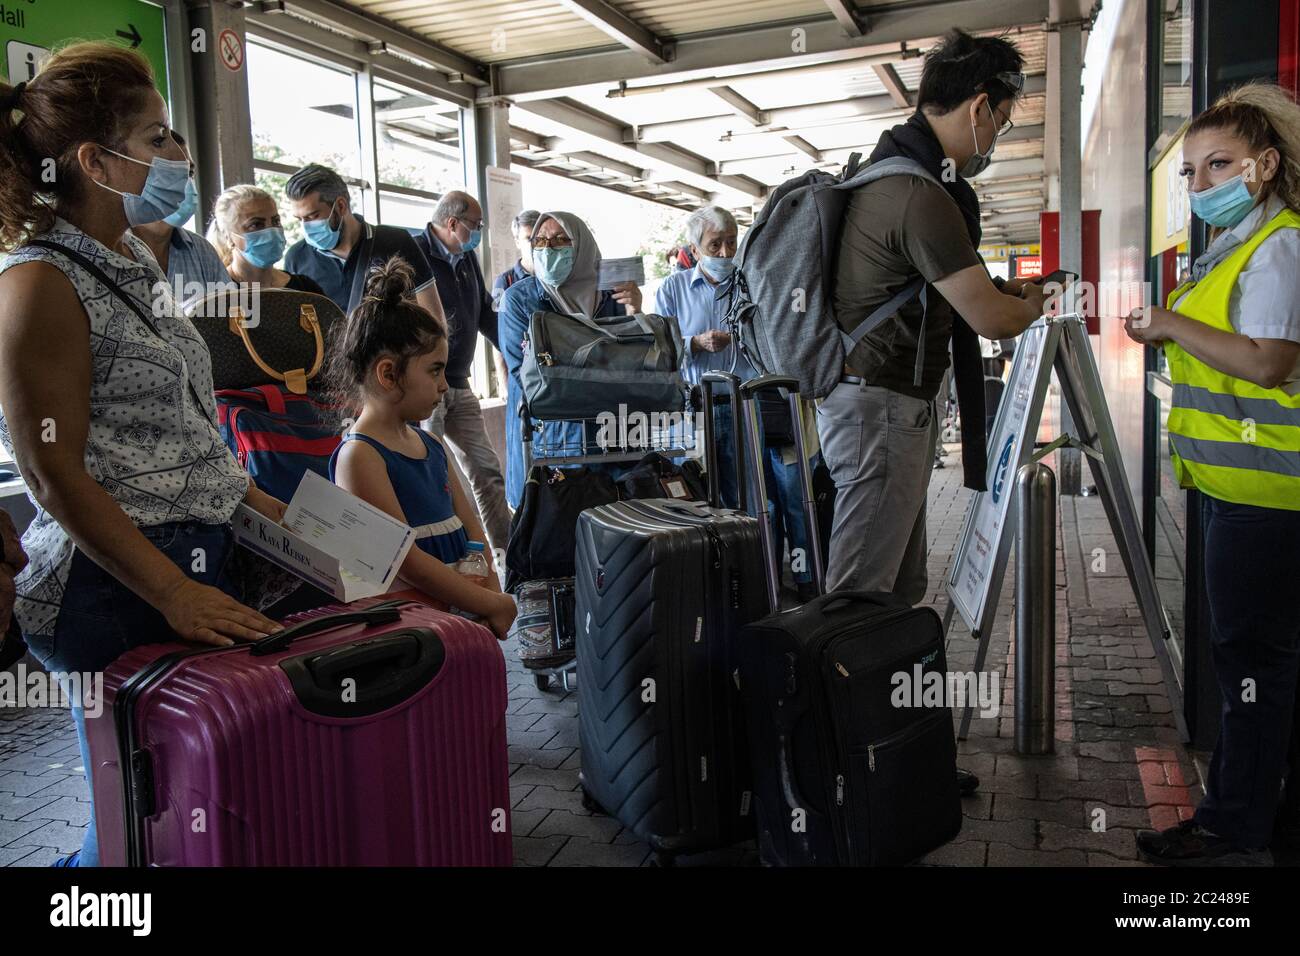 Travellers queuing up outside the Berlin Tegel Airport terminal trying to check-in for flights during the coronavirus COVID 19 restrictions, Germany. Stock Photo